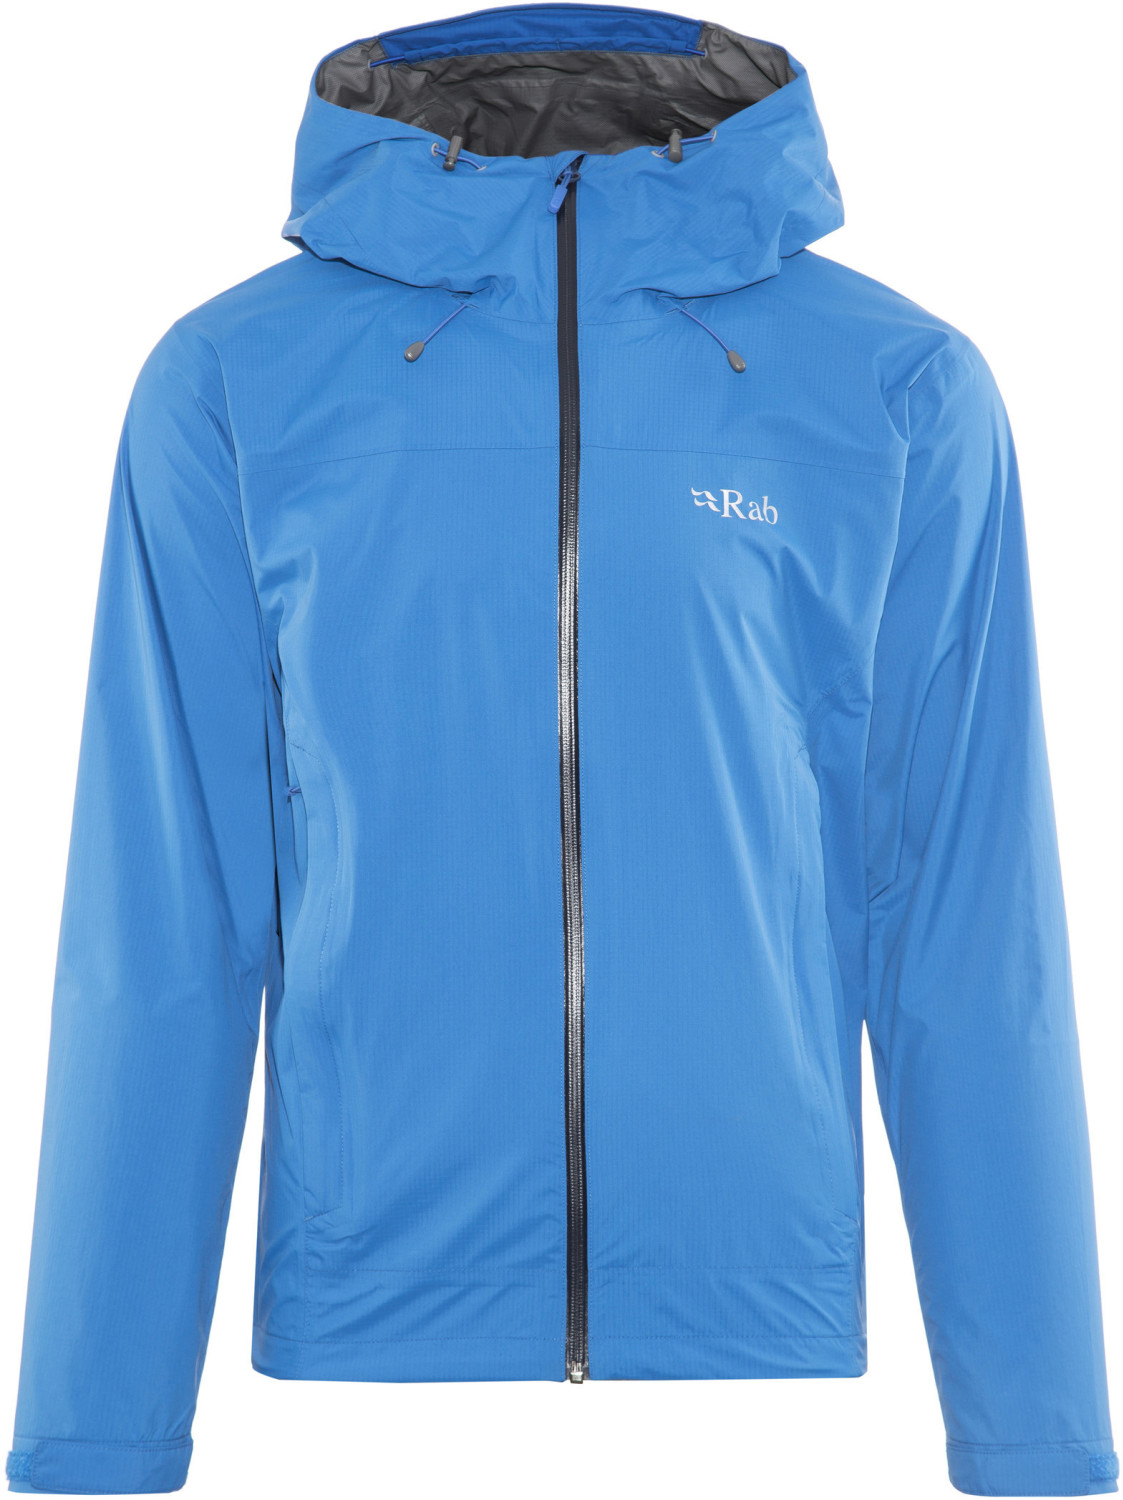 Buy Rab Downpour Jacket Men Blue from Â£93.82 (Today) â Best Deals on idealo.co.uk